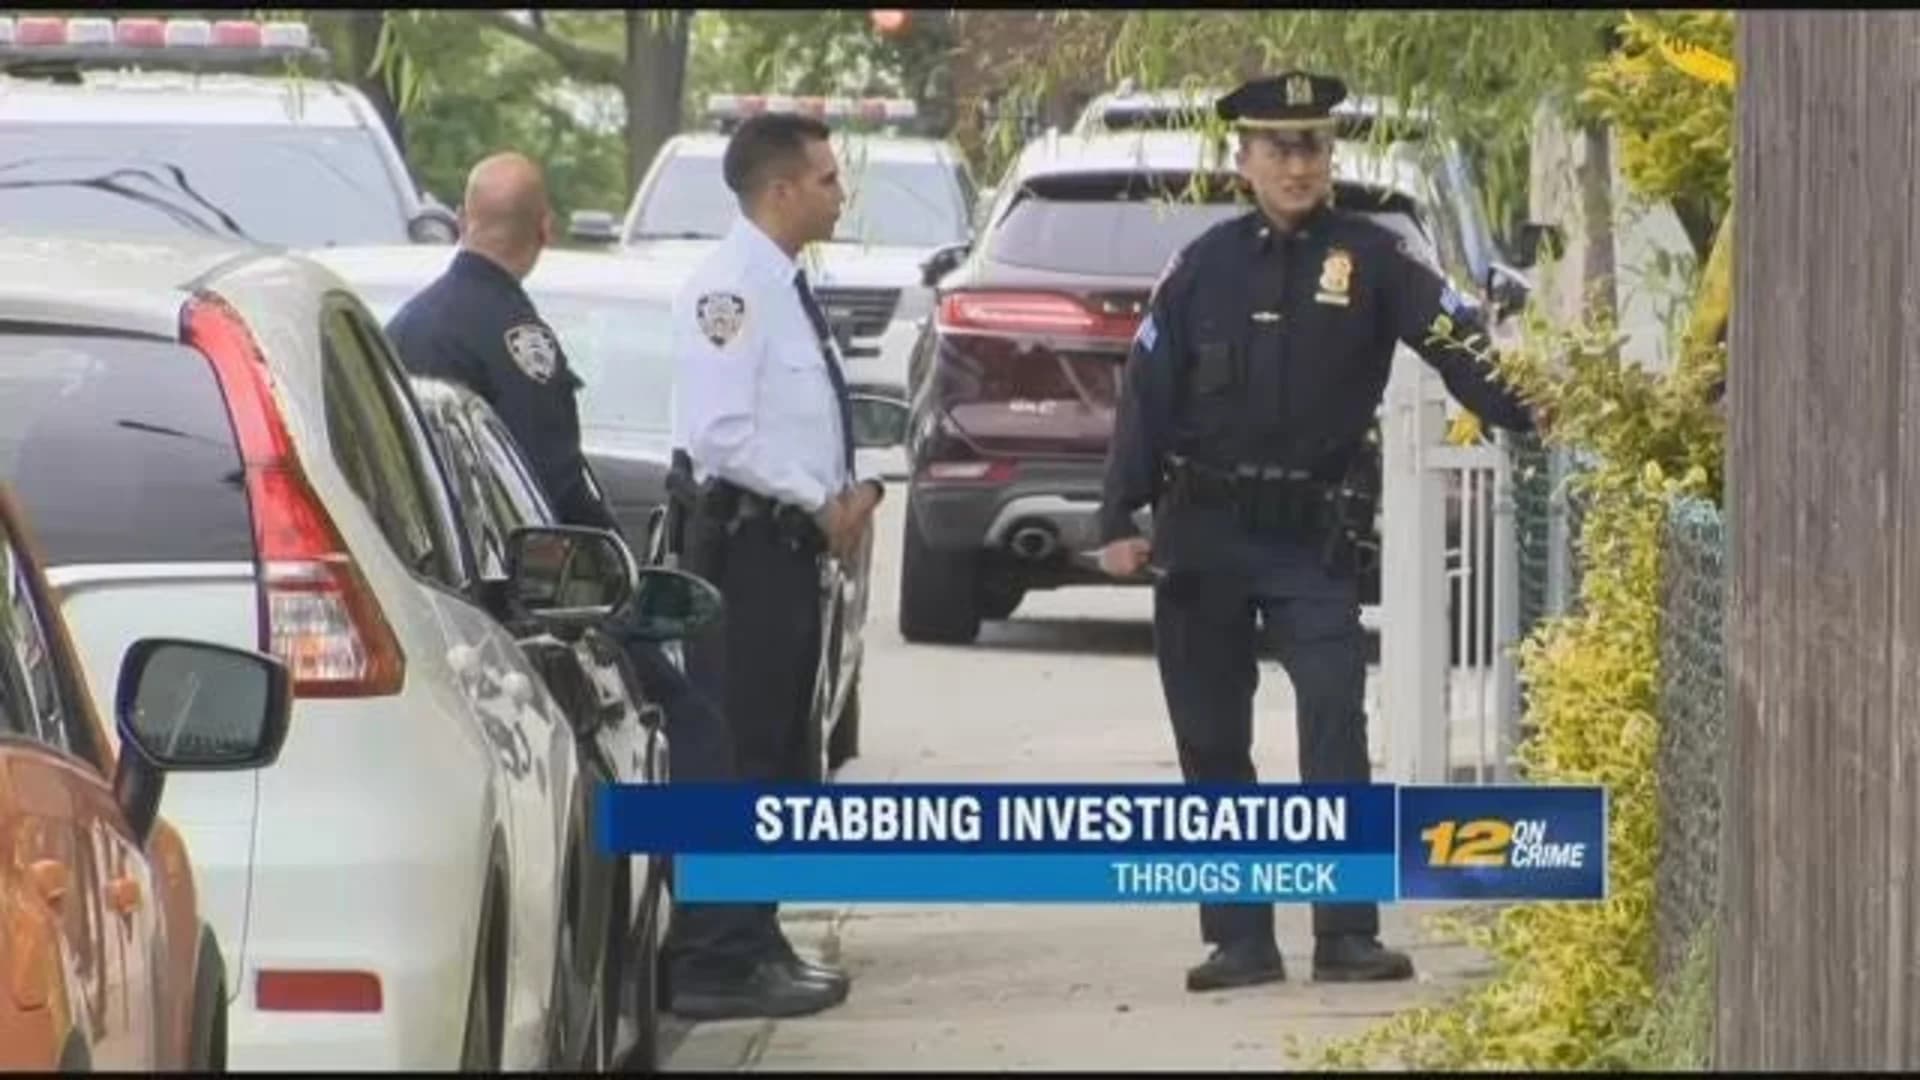 Police: Man stabbed in Throgs Neck home